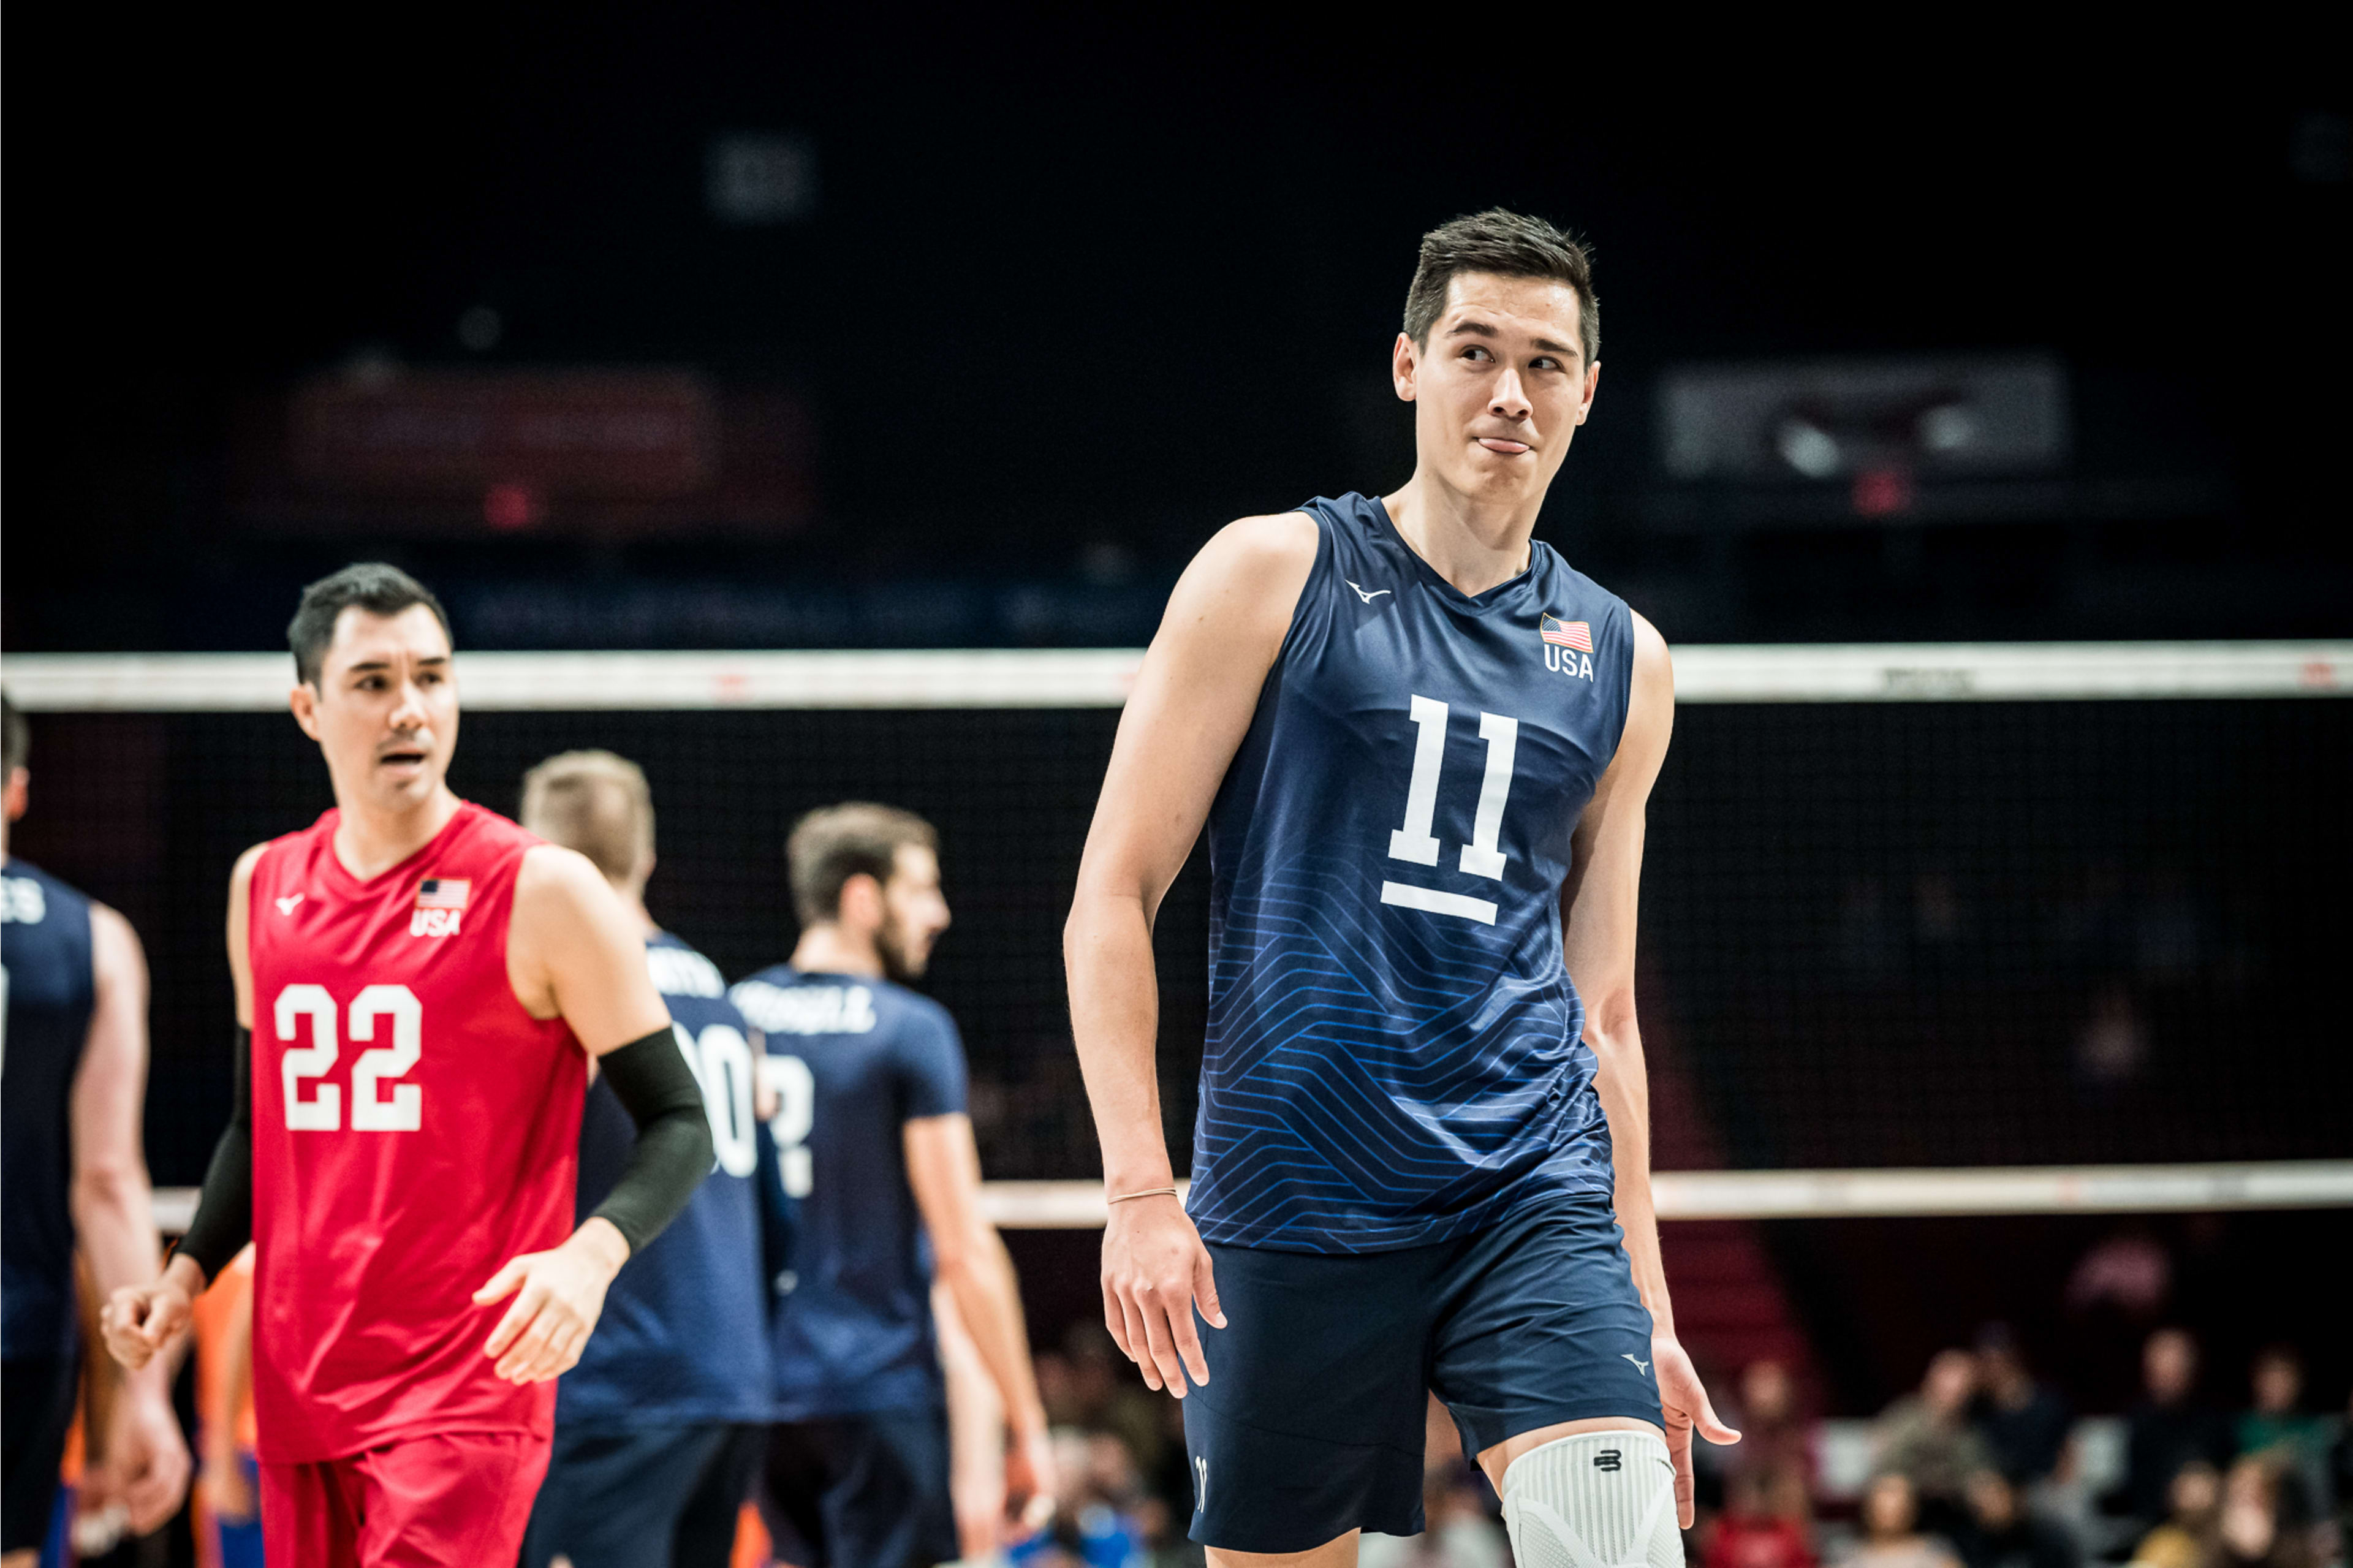 VNL moments that made us go, ‘Whoa!’ Men’s Edition